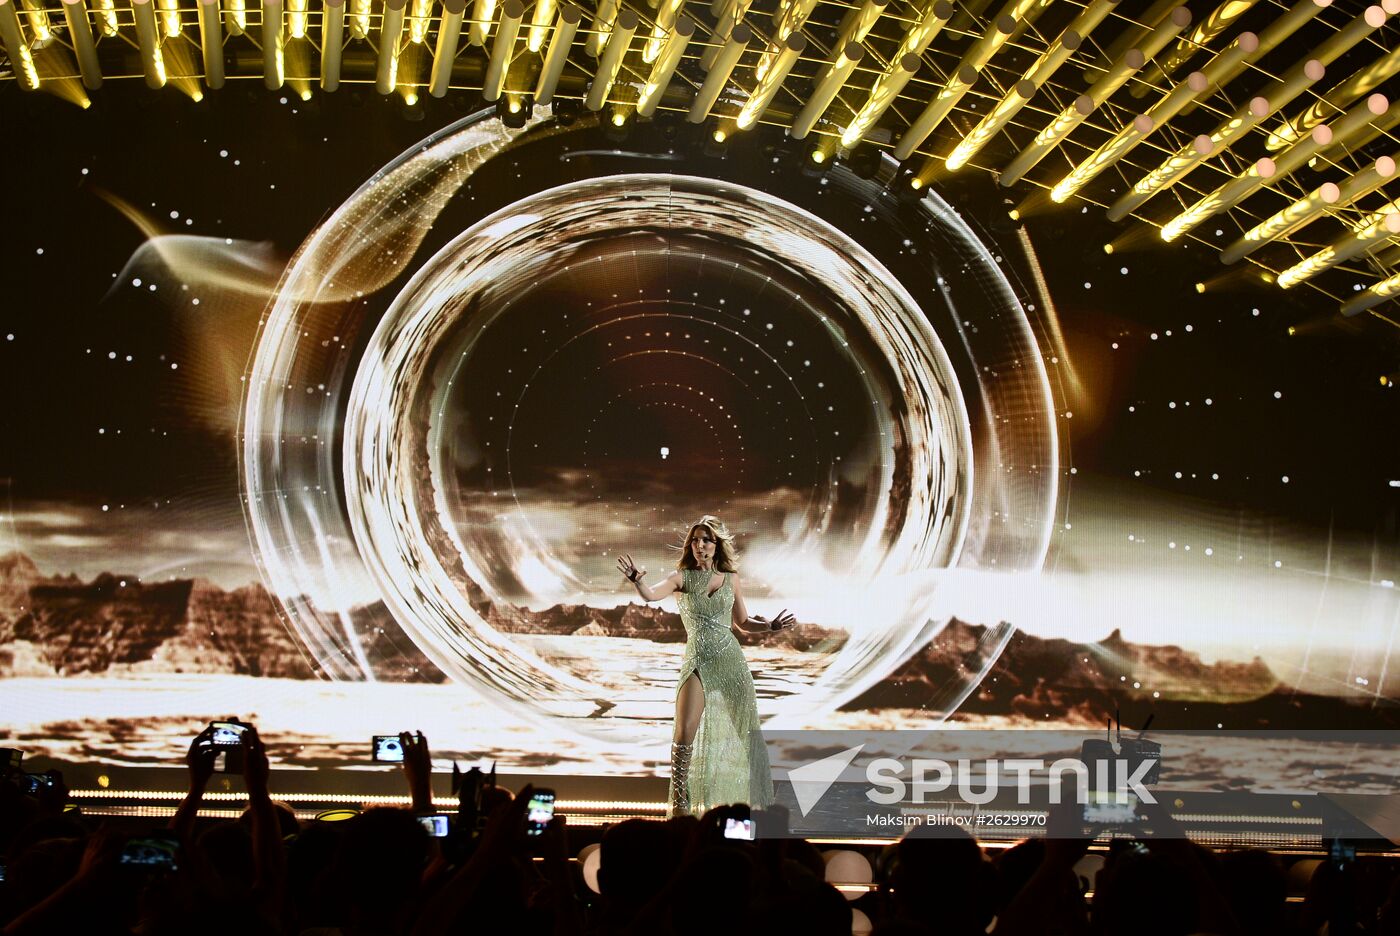 Final rehearsal for the Eurovision Song Contest 2015 in Vienna